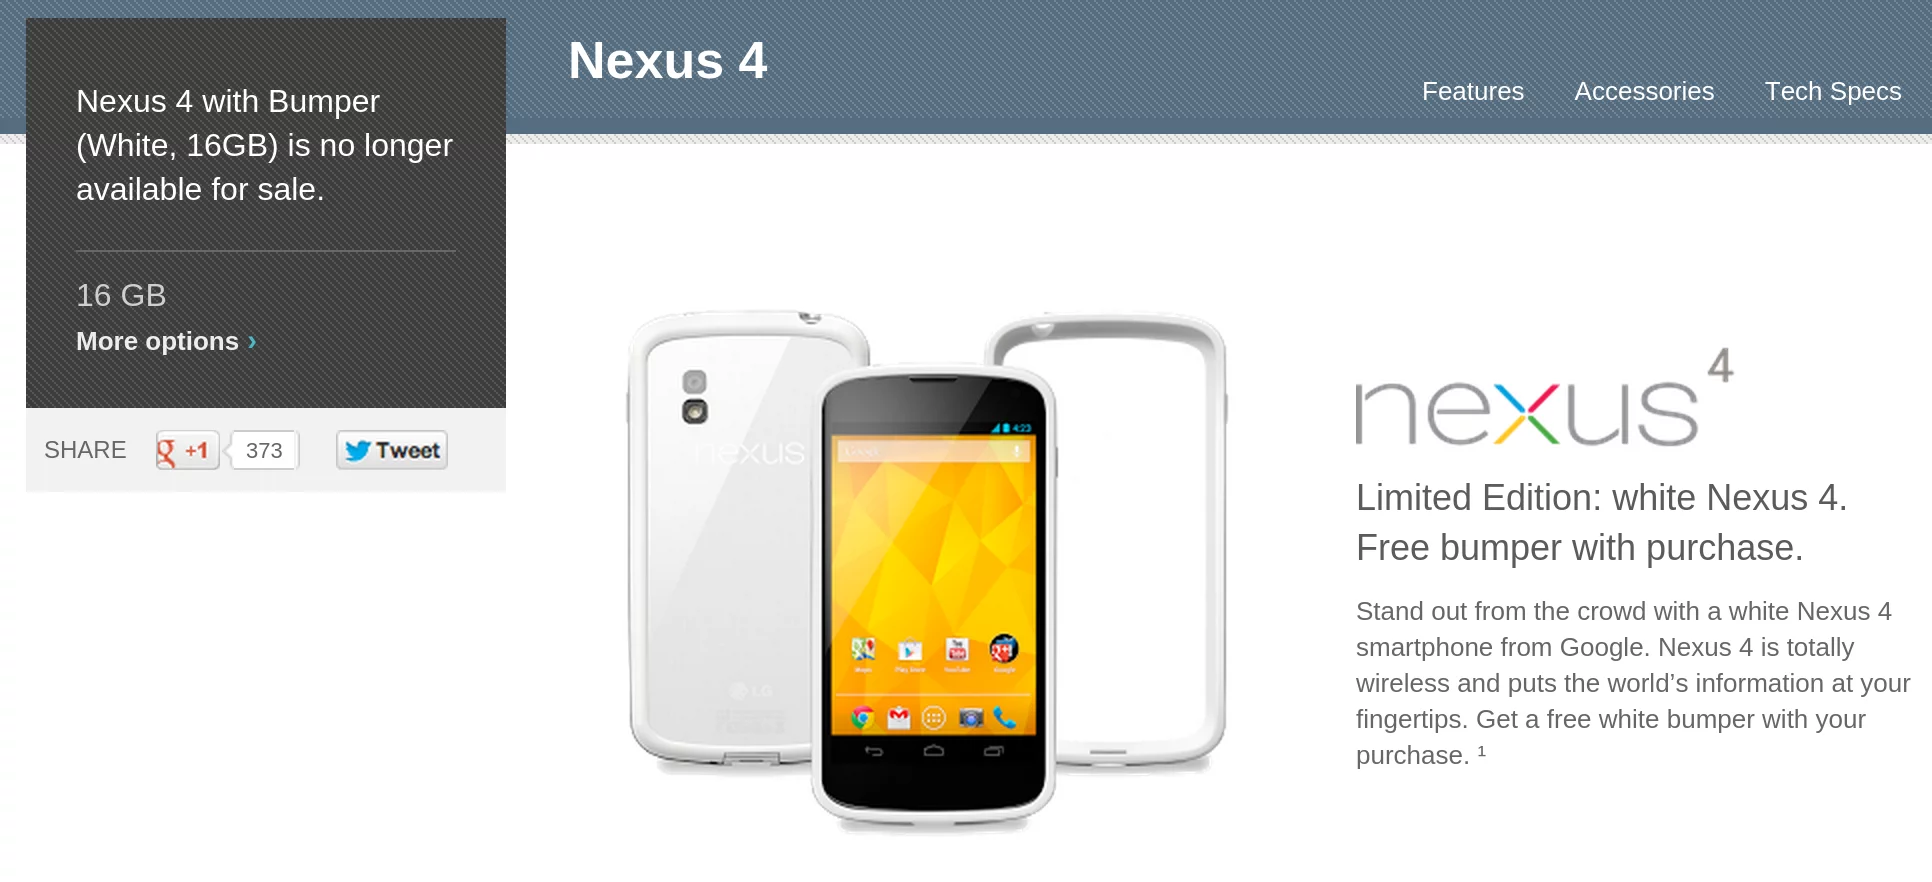 White Nexus 4 not available - for some reason we don't have an alt tag here